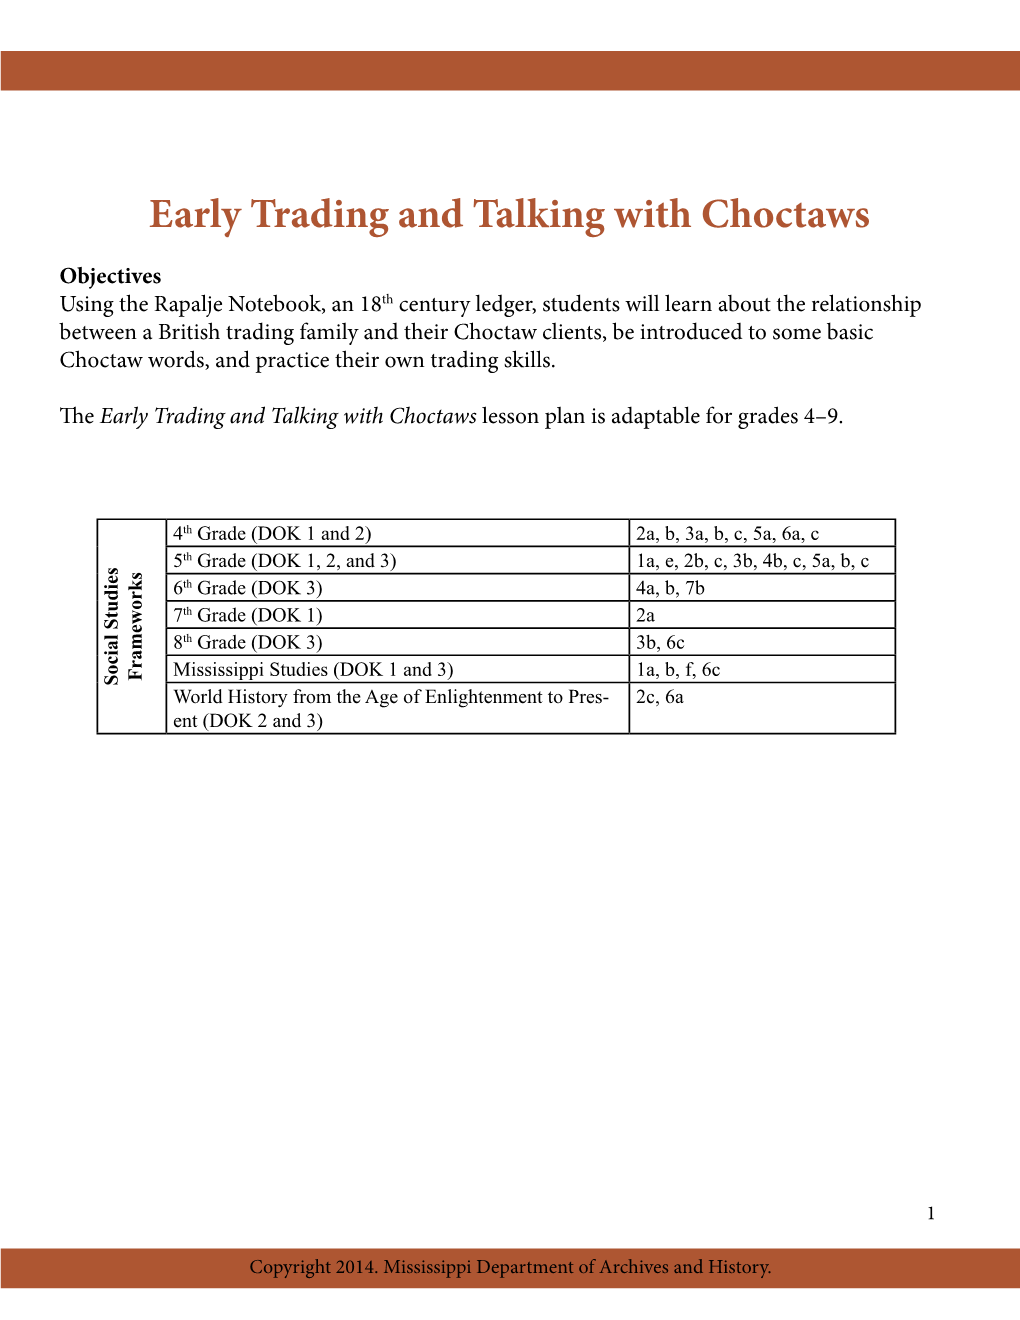 Early Trading and Talking with Choctaws